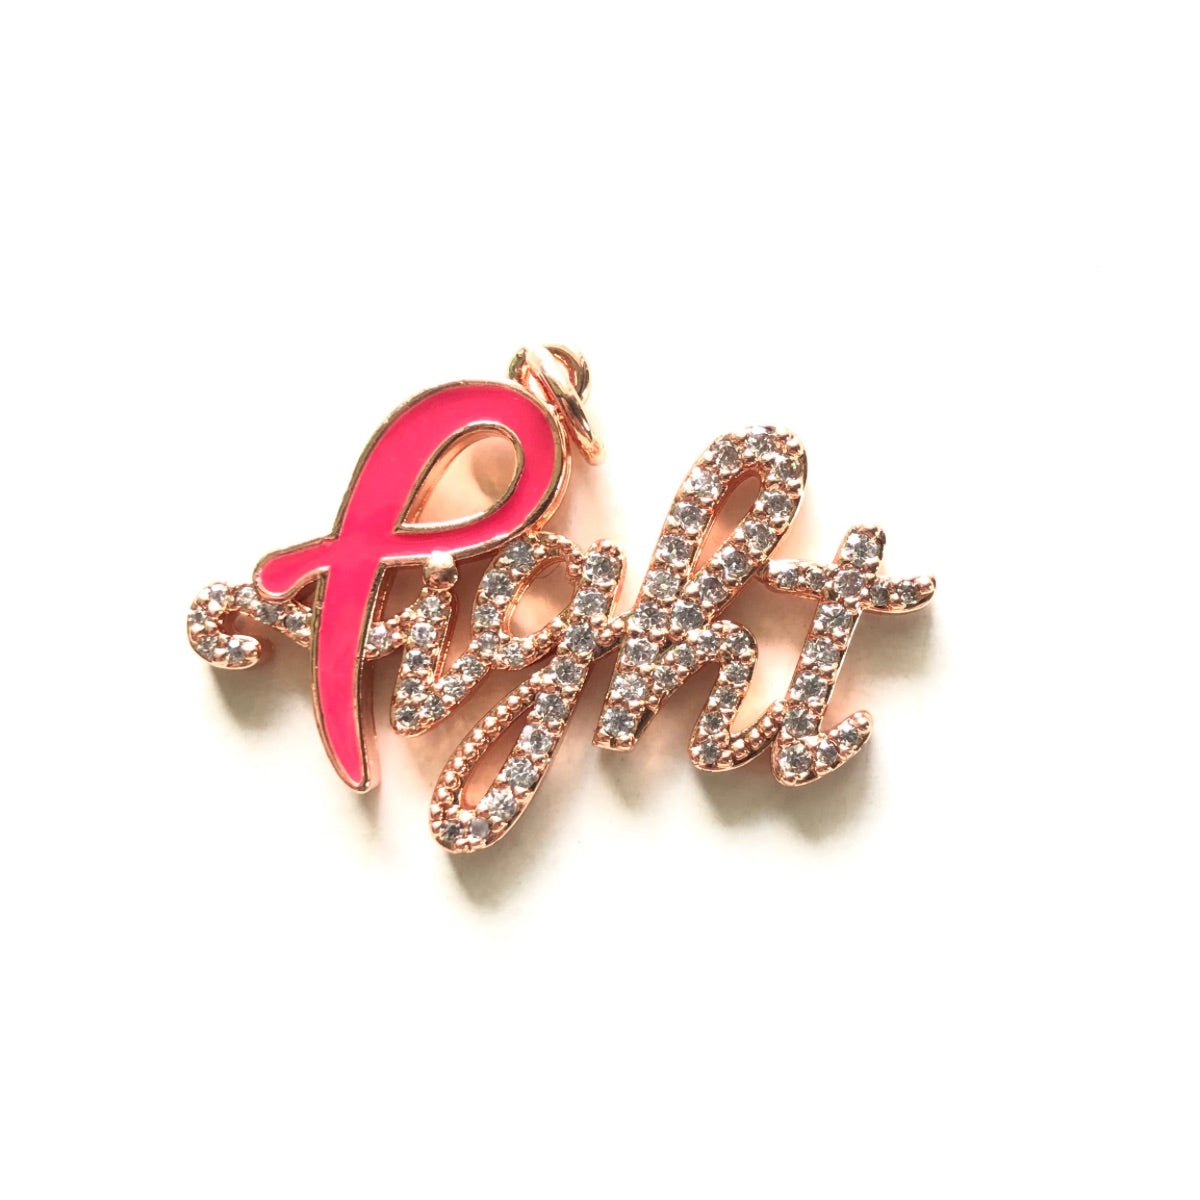 10pcs/lot CZ Paved Pink Ribbon Fight Charms - Breast Cancer Awareness Rose Gold CZ Paved Charms Breast Cancer Awareness Charms Beads Beyond